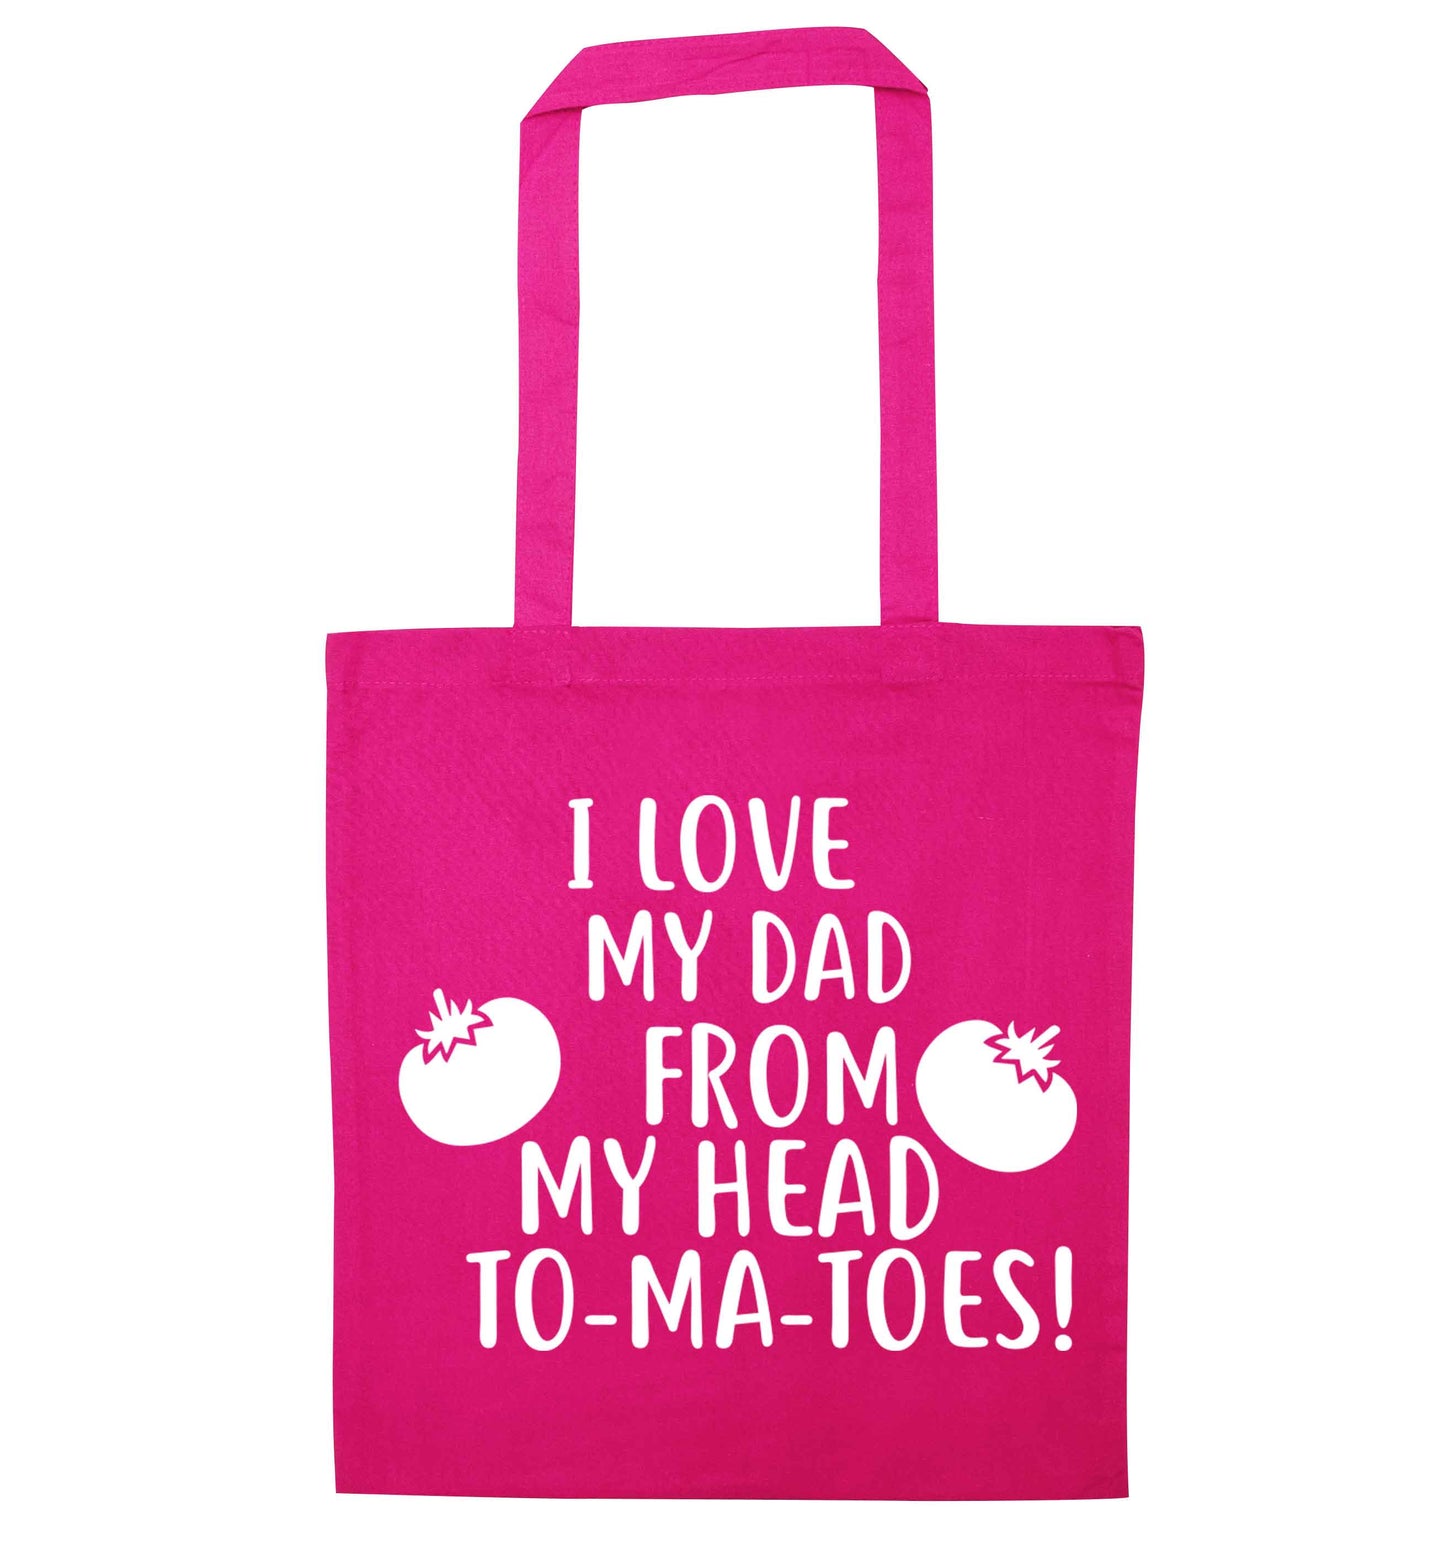 I love my dad from my head to-ma-toes pink tote bag